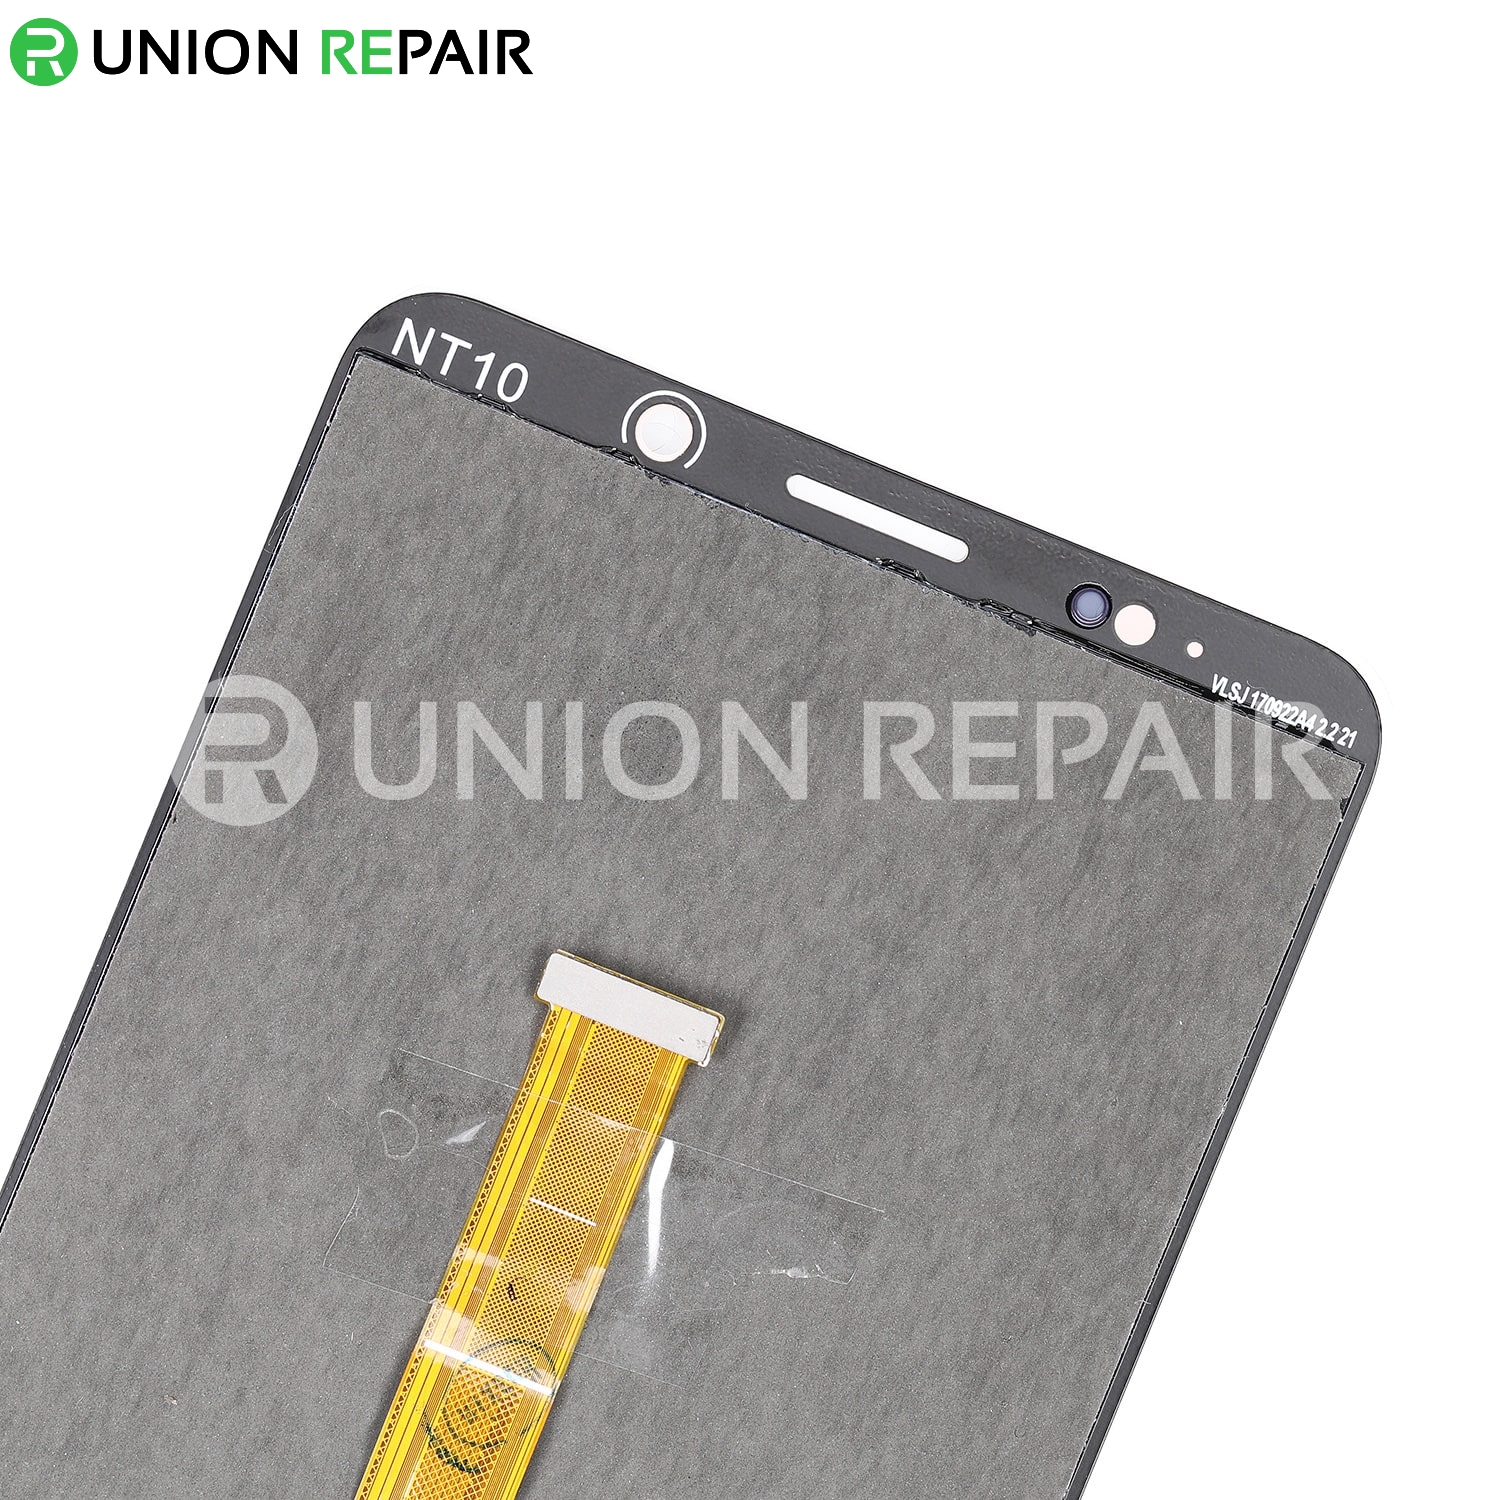 Replacement for Huawei Mate 10 Pro LCD Screen Digitizer Assembly - Pink Gold